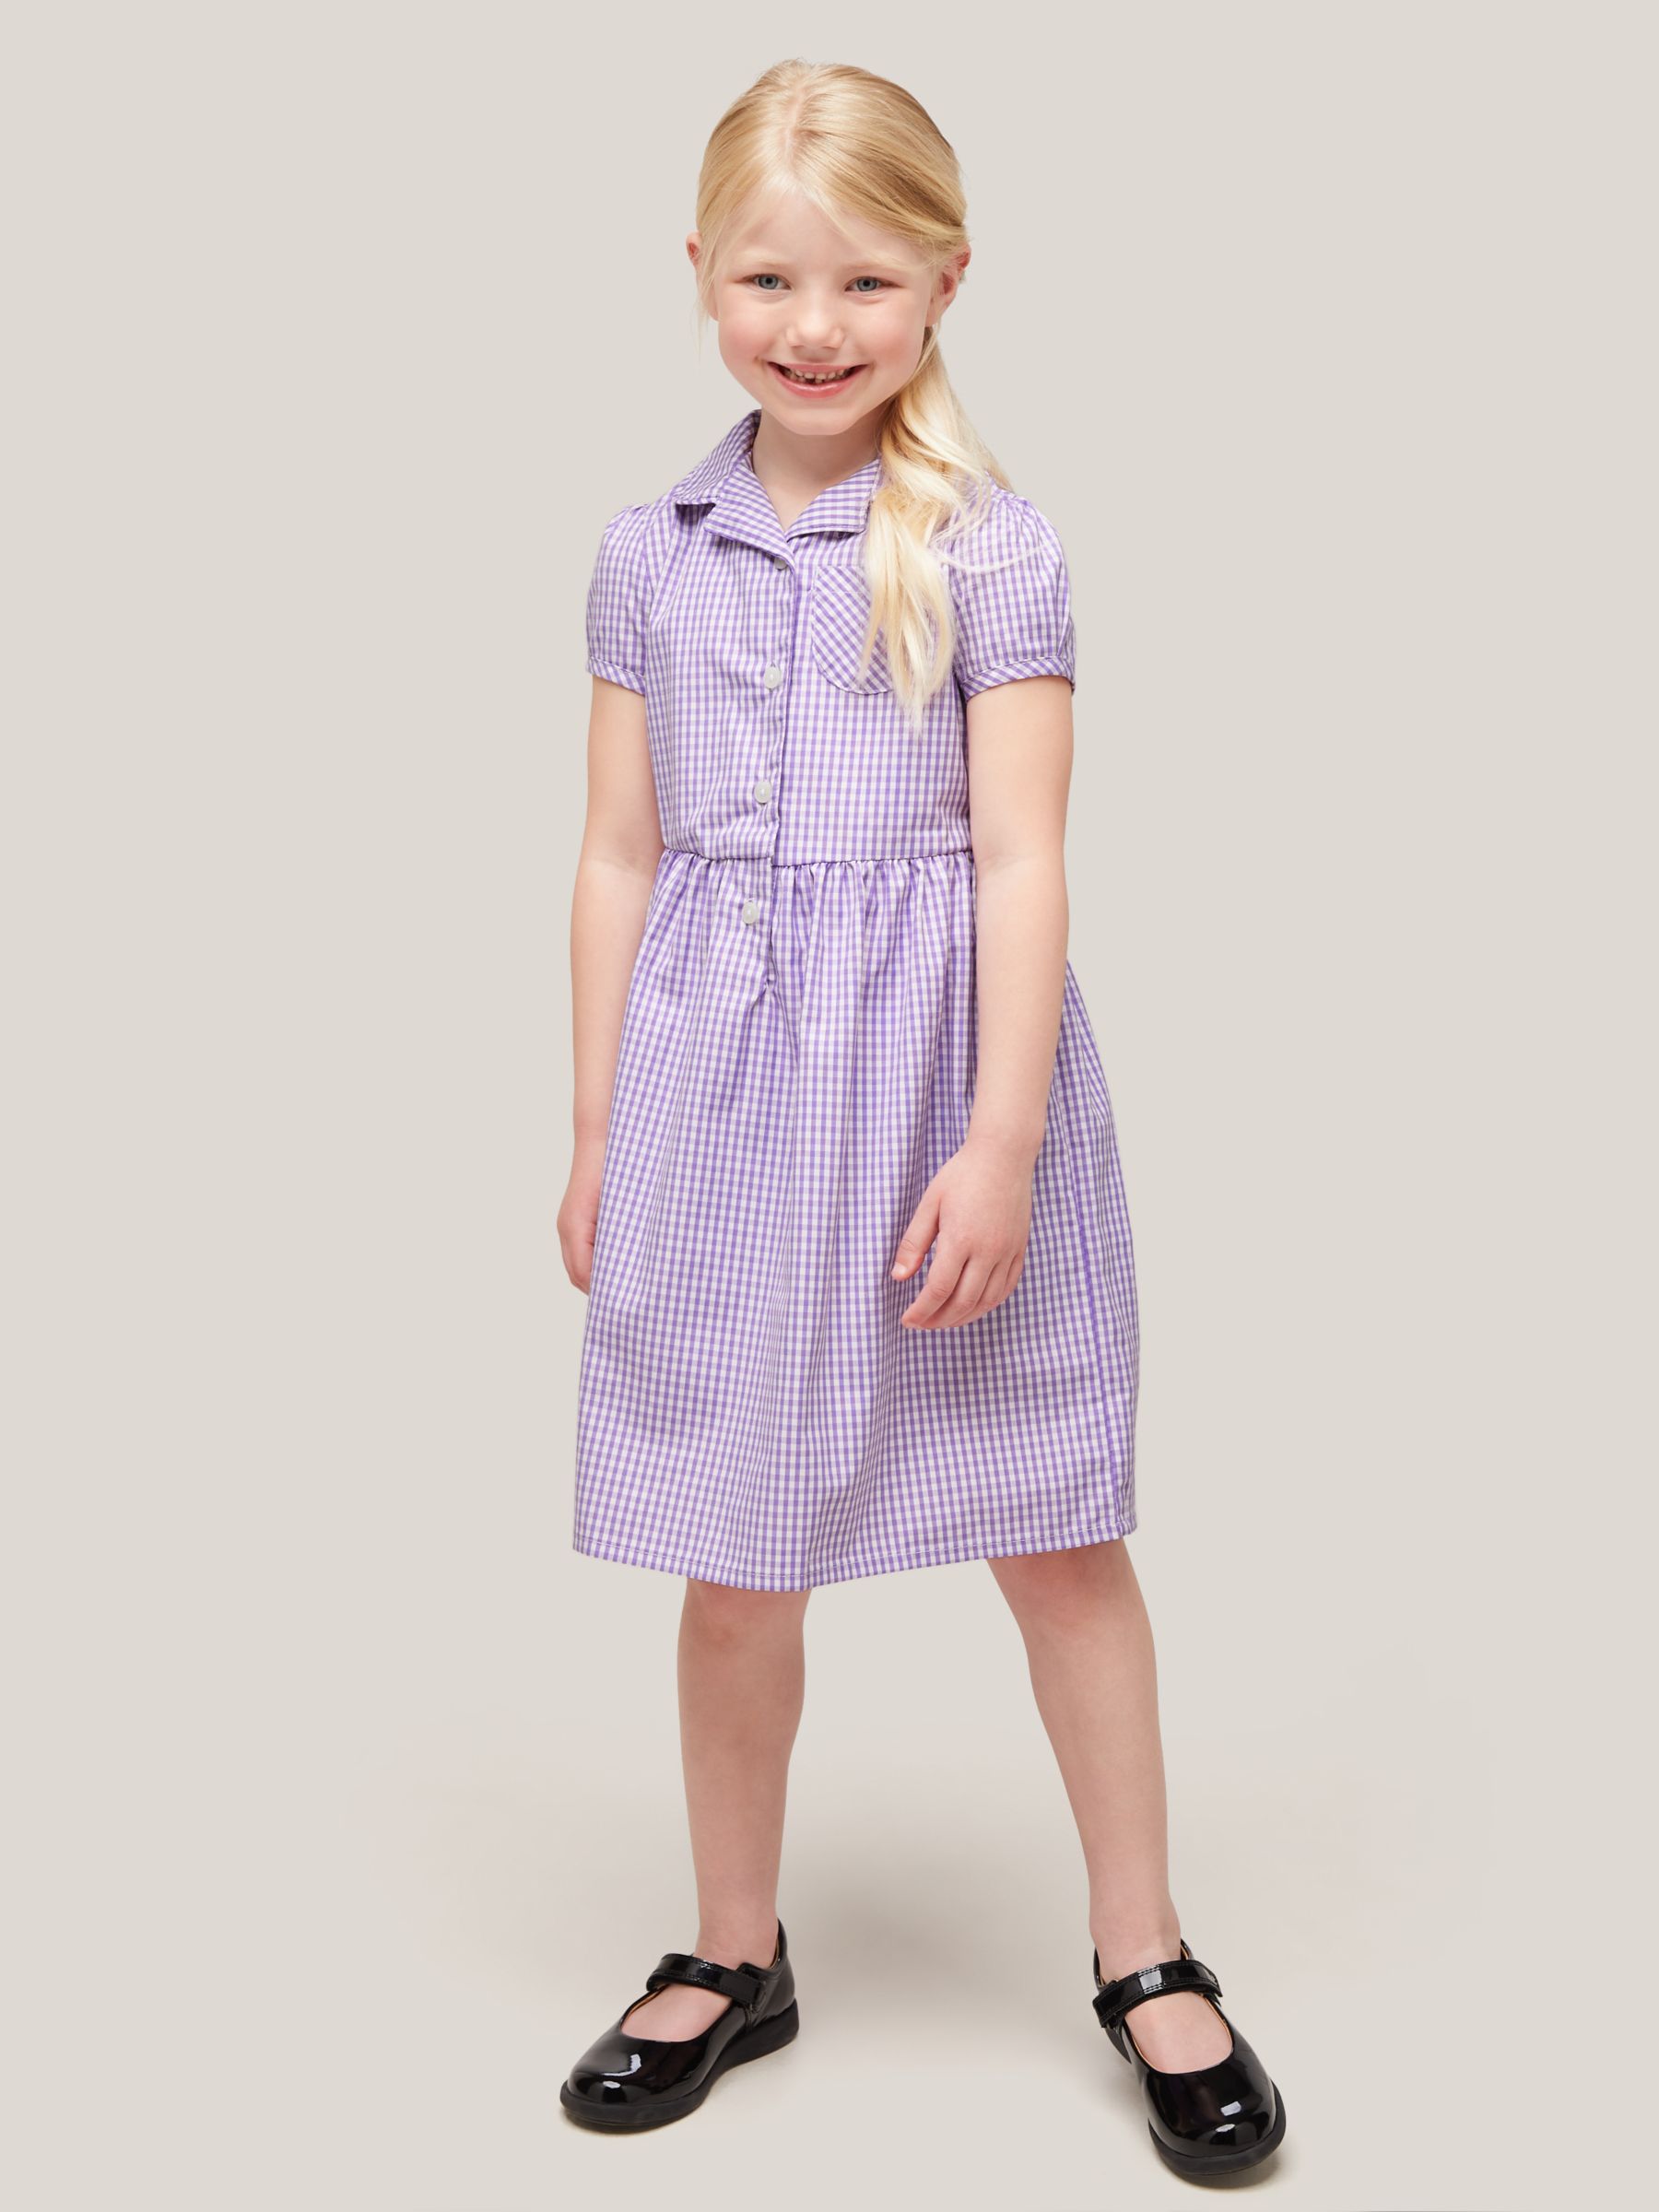 John Lewis School Belted Gingham Checked Summer Dress, Lilac, 7 years